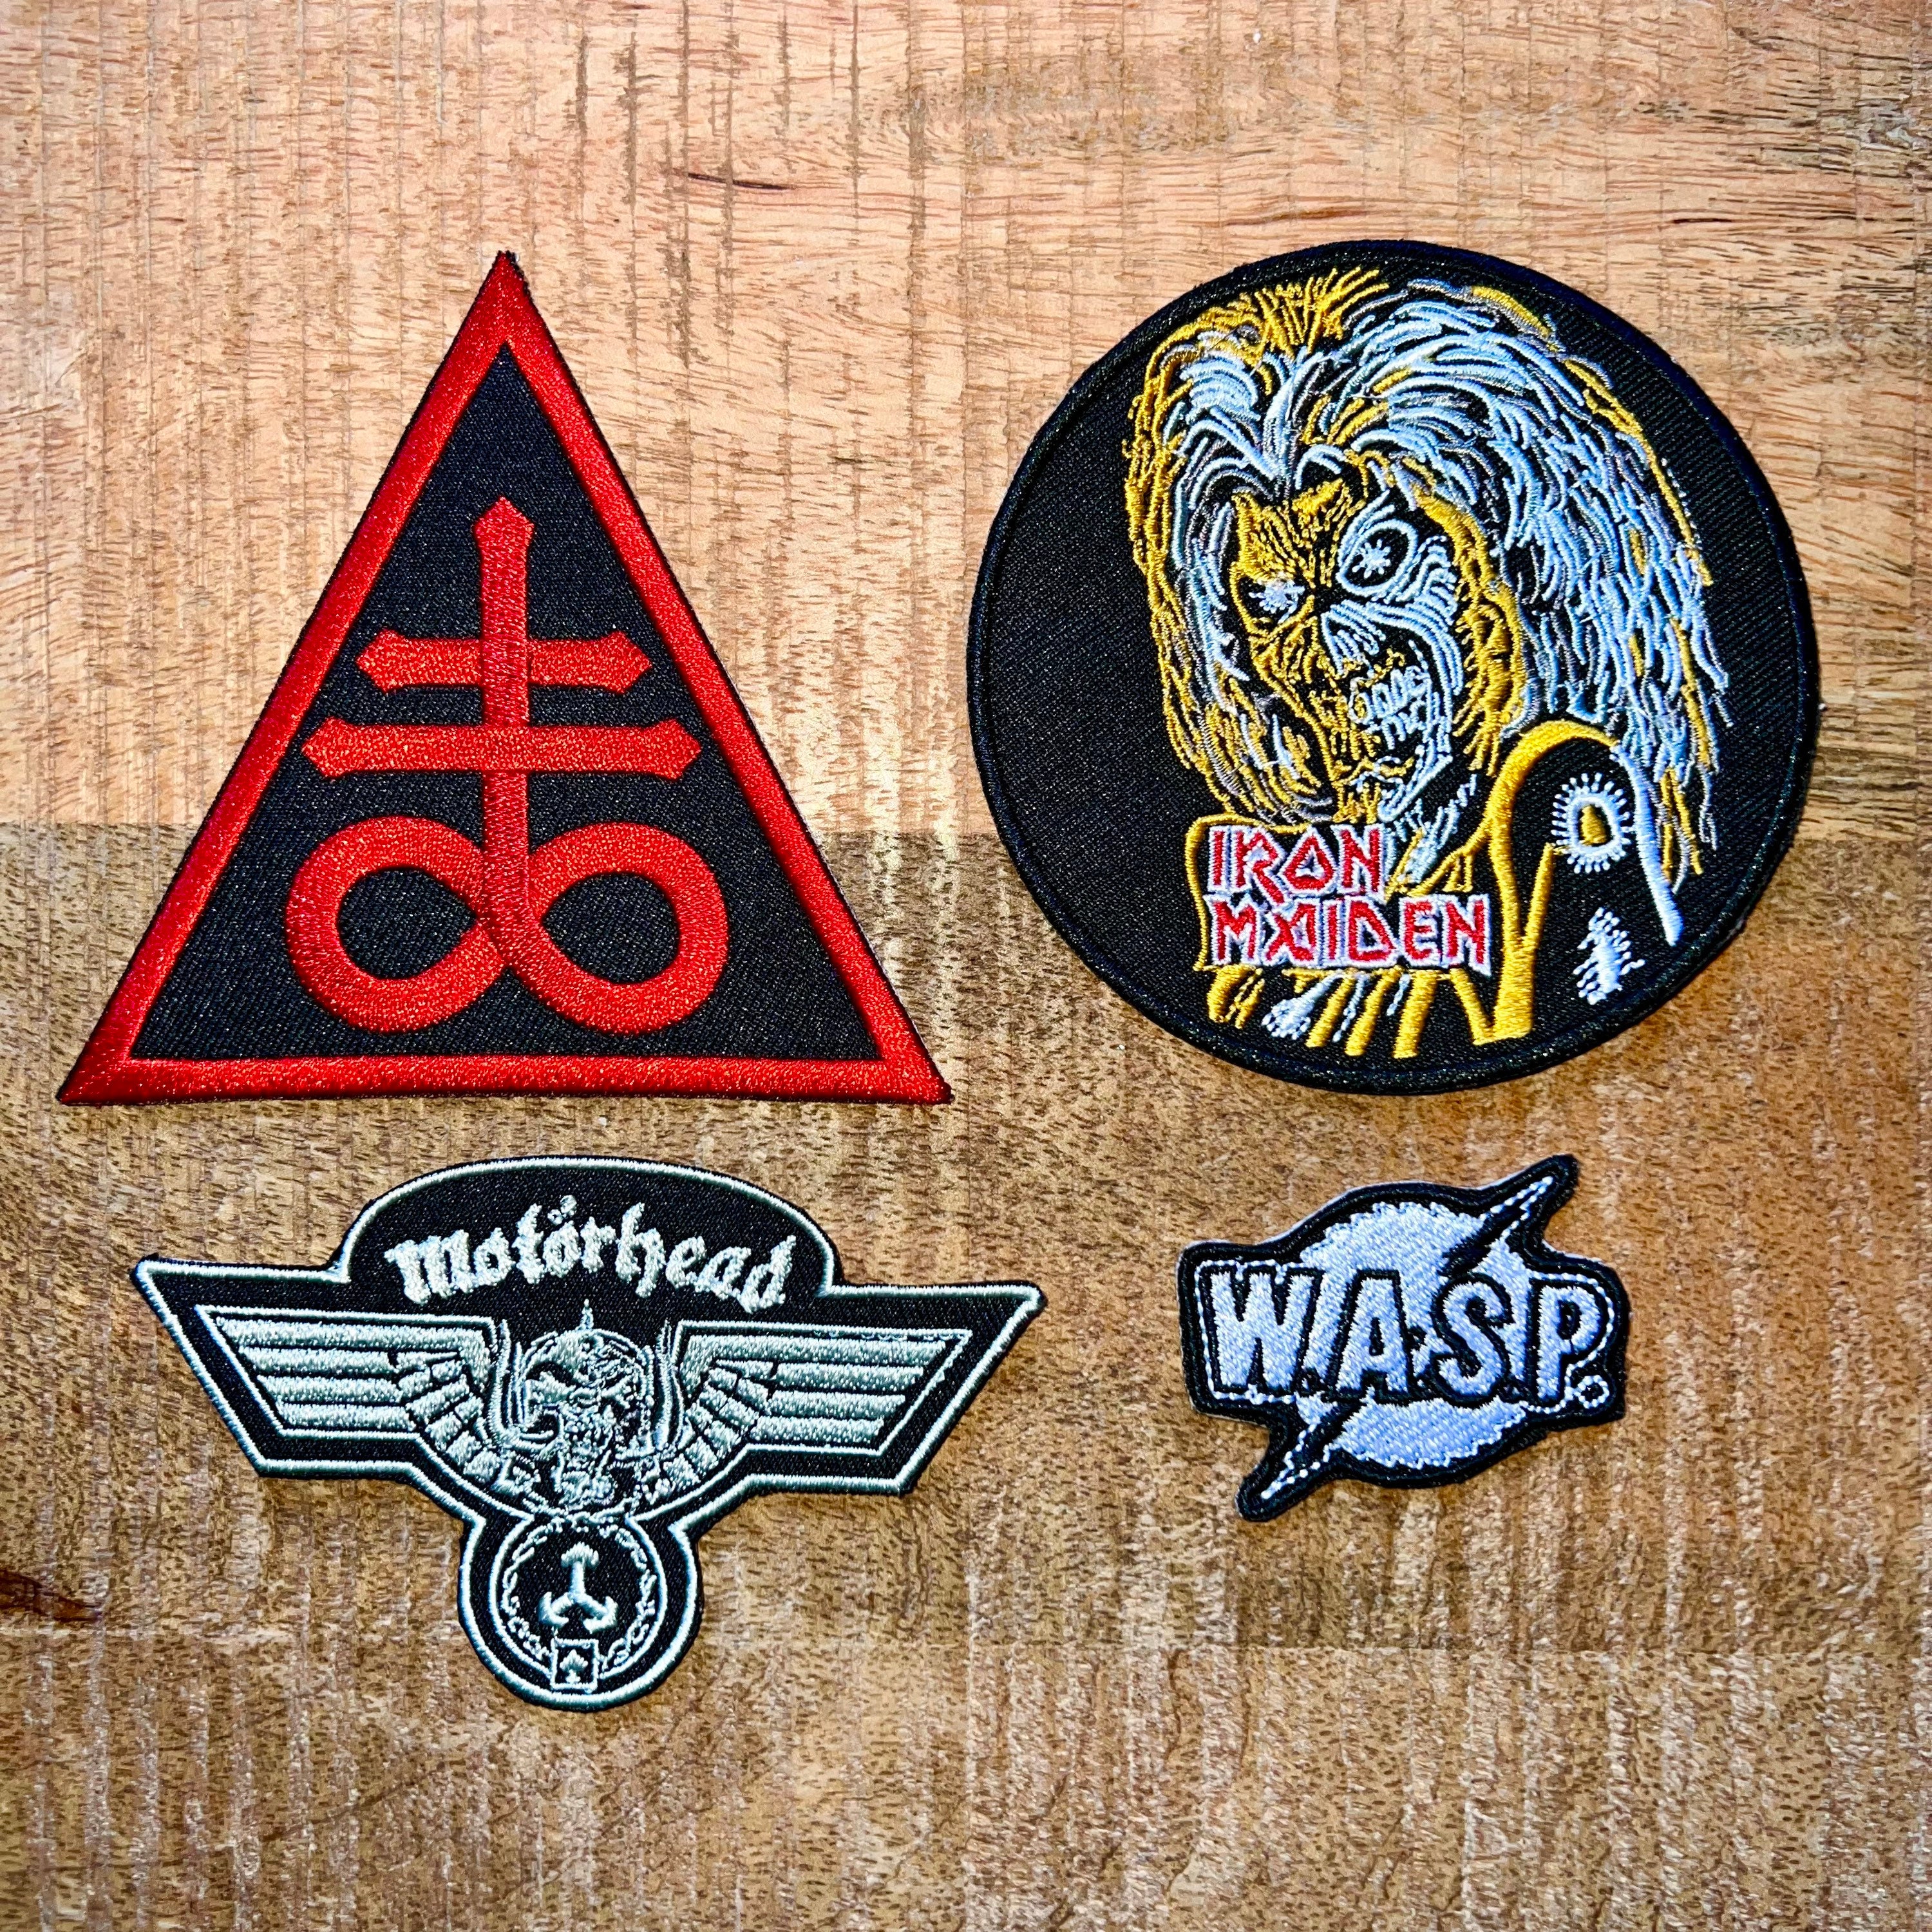 Eddie Munson Vest Patches and Pins (COMPLETE Set) Stranger Things